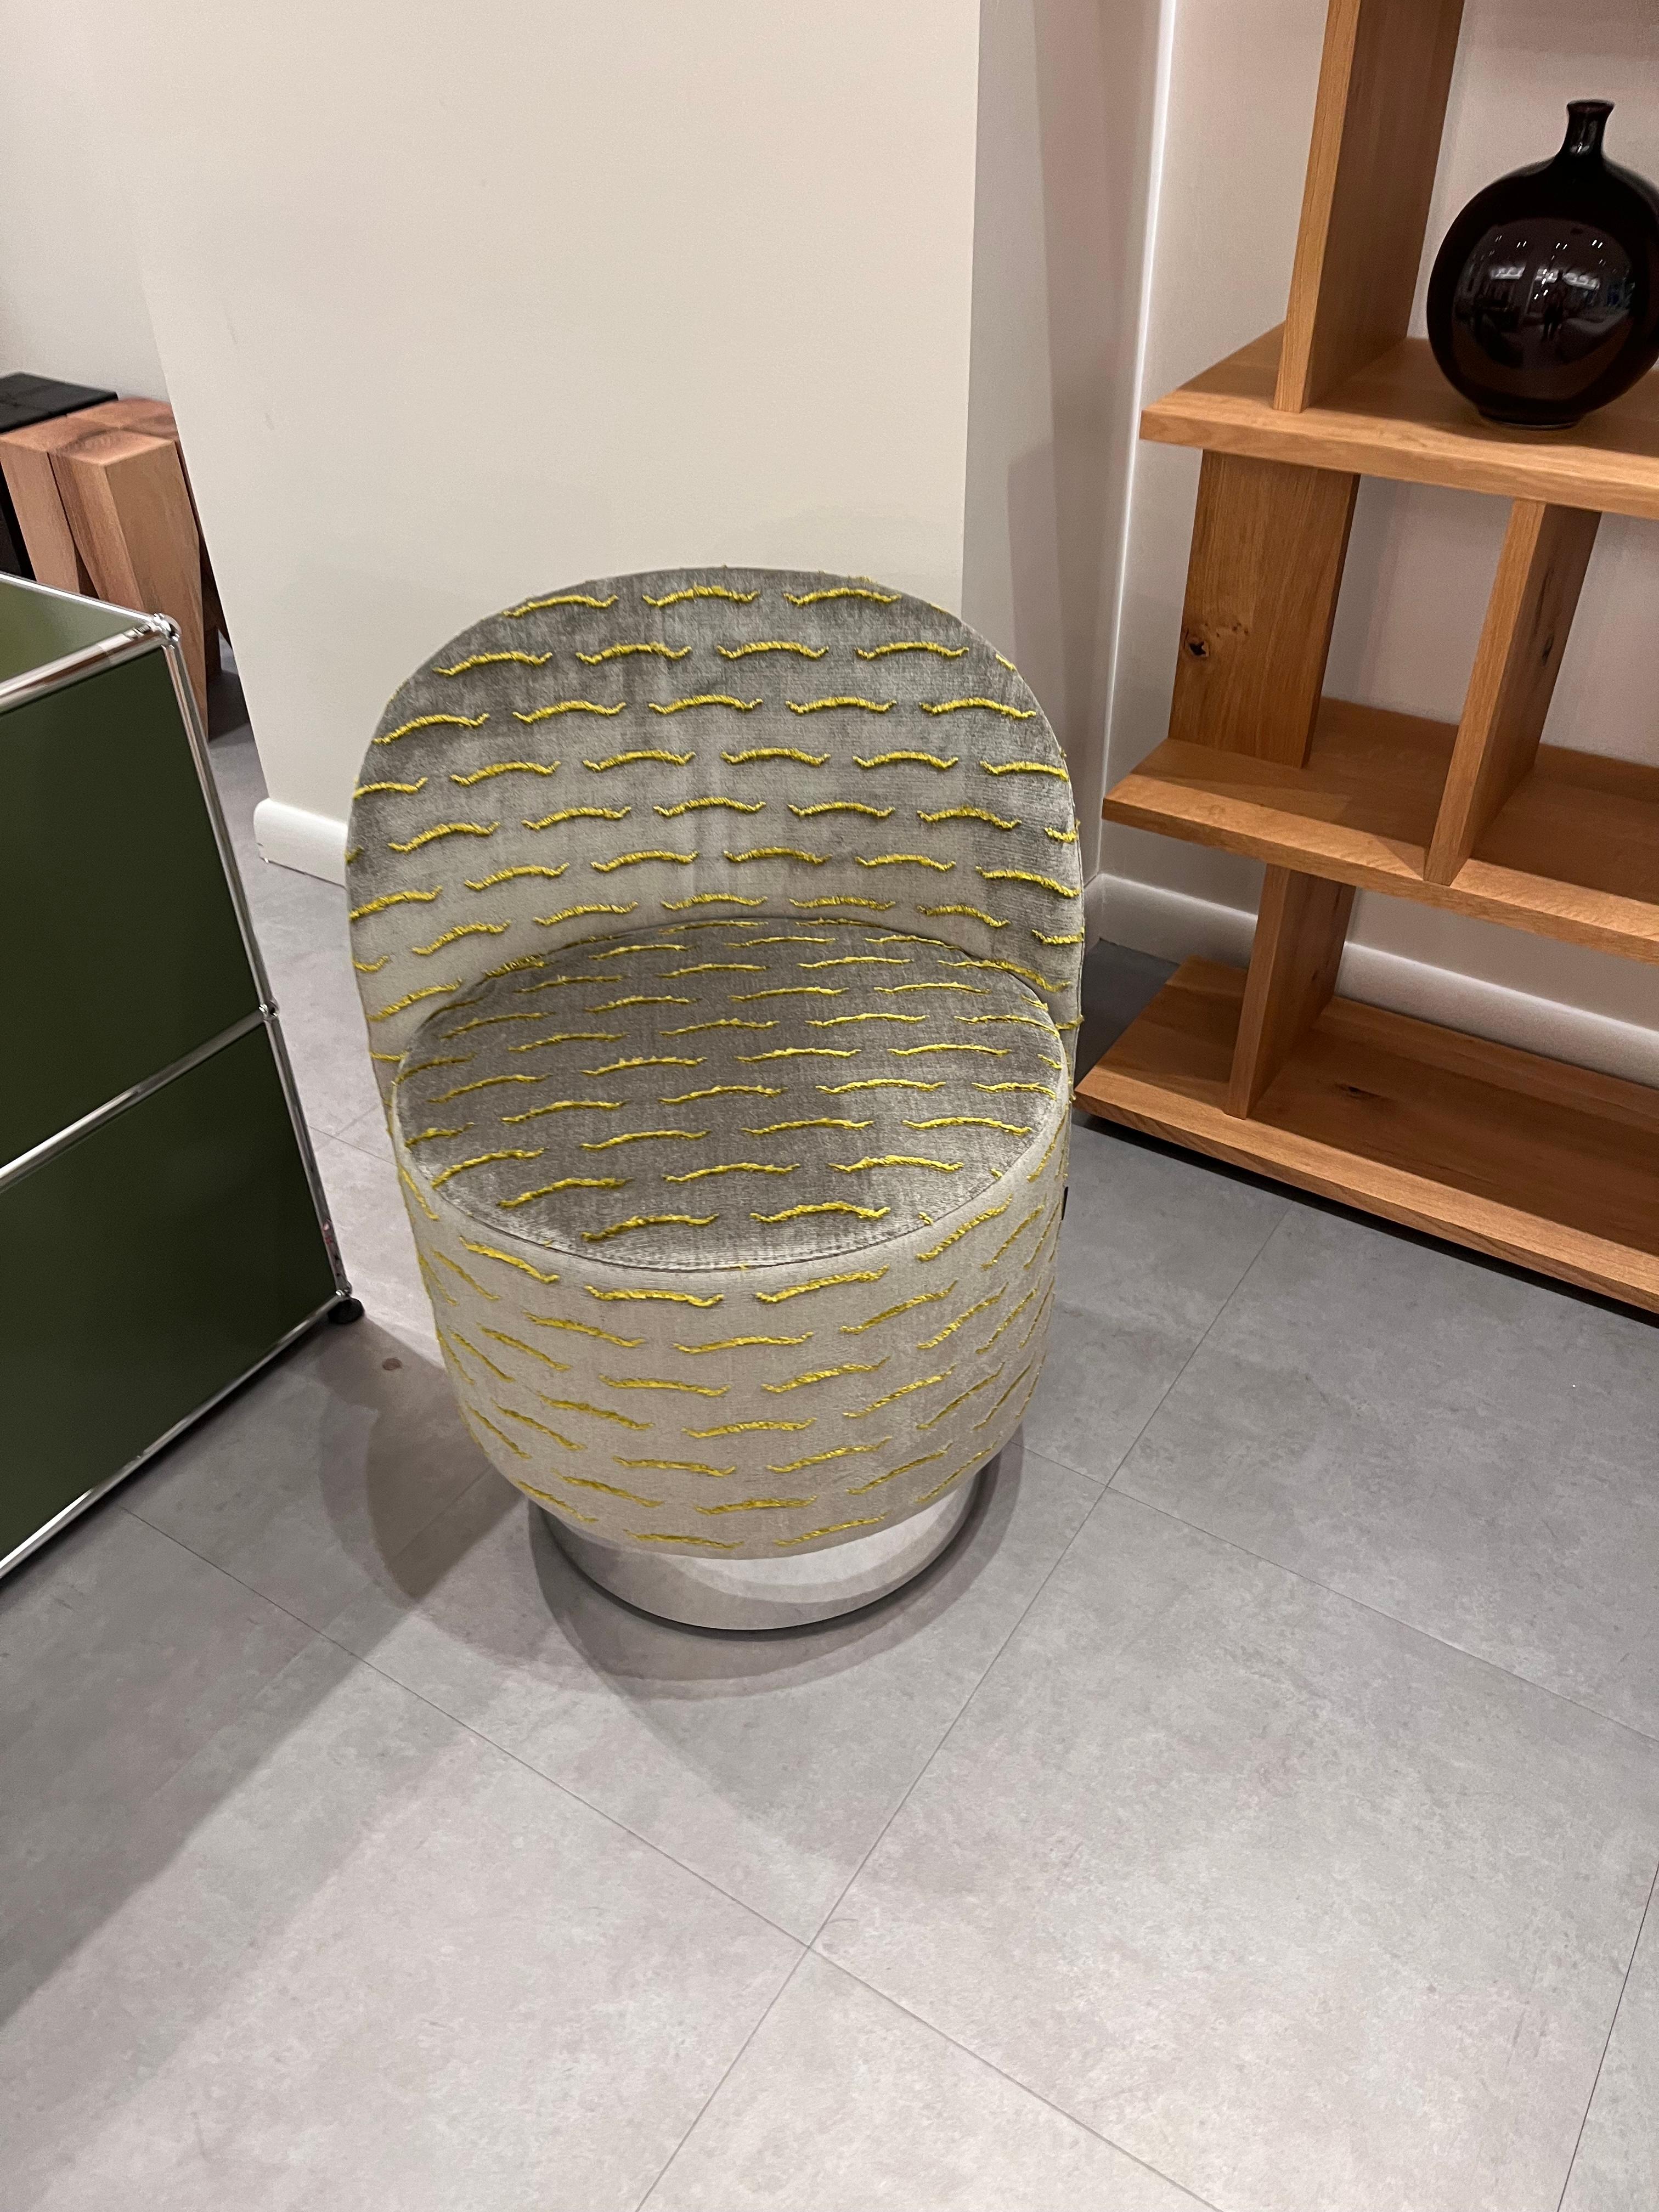 Upholstered in  CAT Z: ZENZERO 03
GLOSS ALUMINIUM FINISH AL
WITH CAL117 INTERLINER

The new project with Studiopepe is a collaboration with designers Arianna Lelli Mami and Chiara Di Pinto, the creative minds behind the consultancy. Pastilles is a